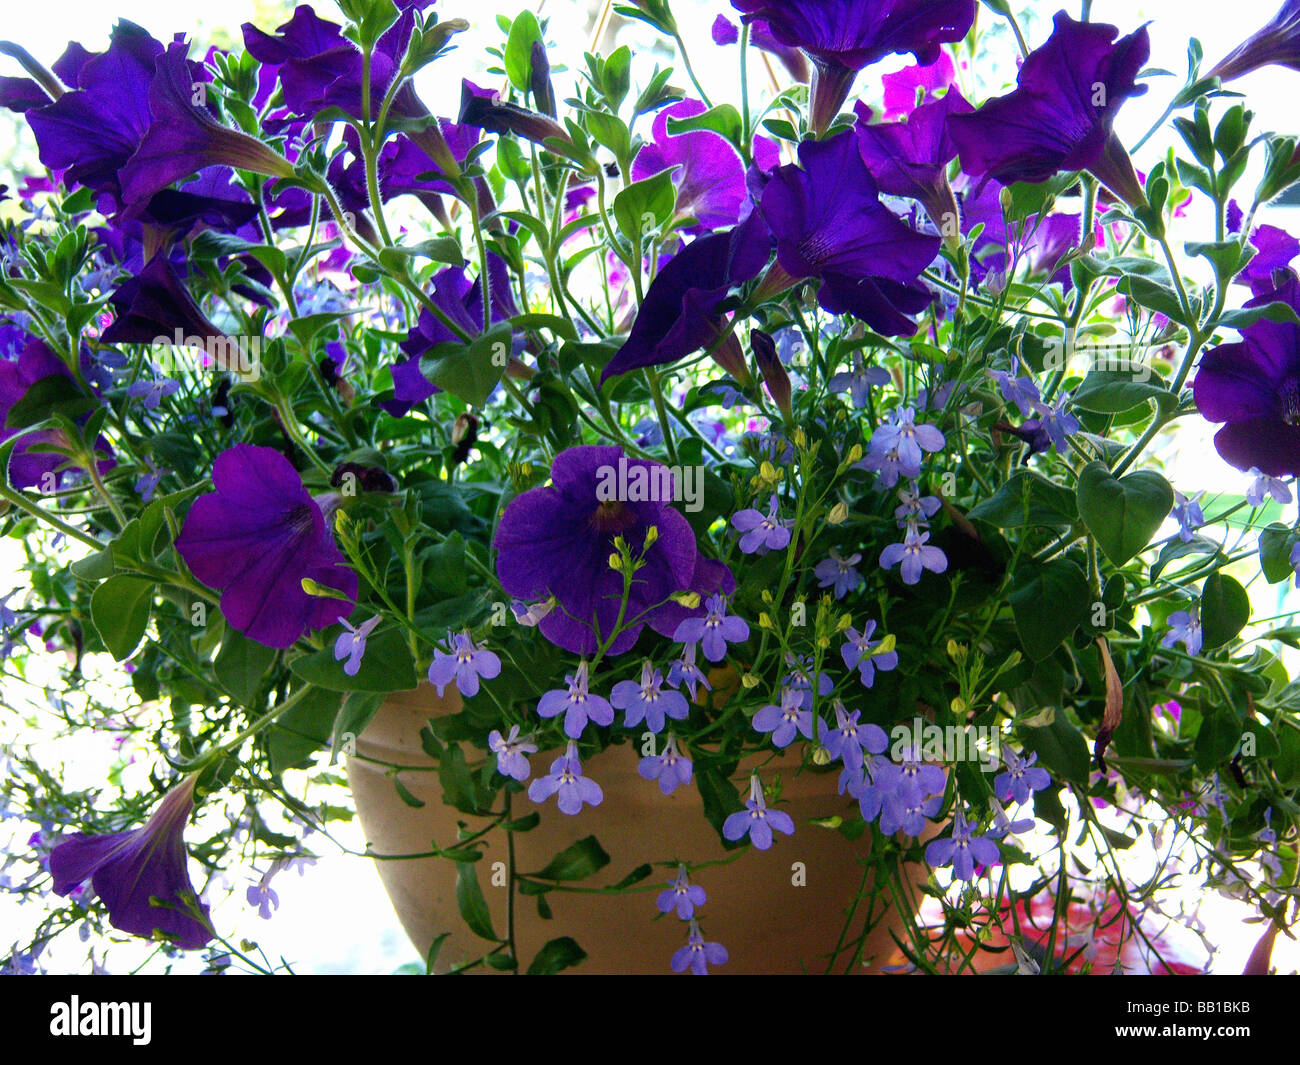 Petunia plant with purple flower and sun light behind plant. Stock Photo